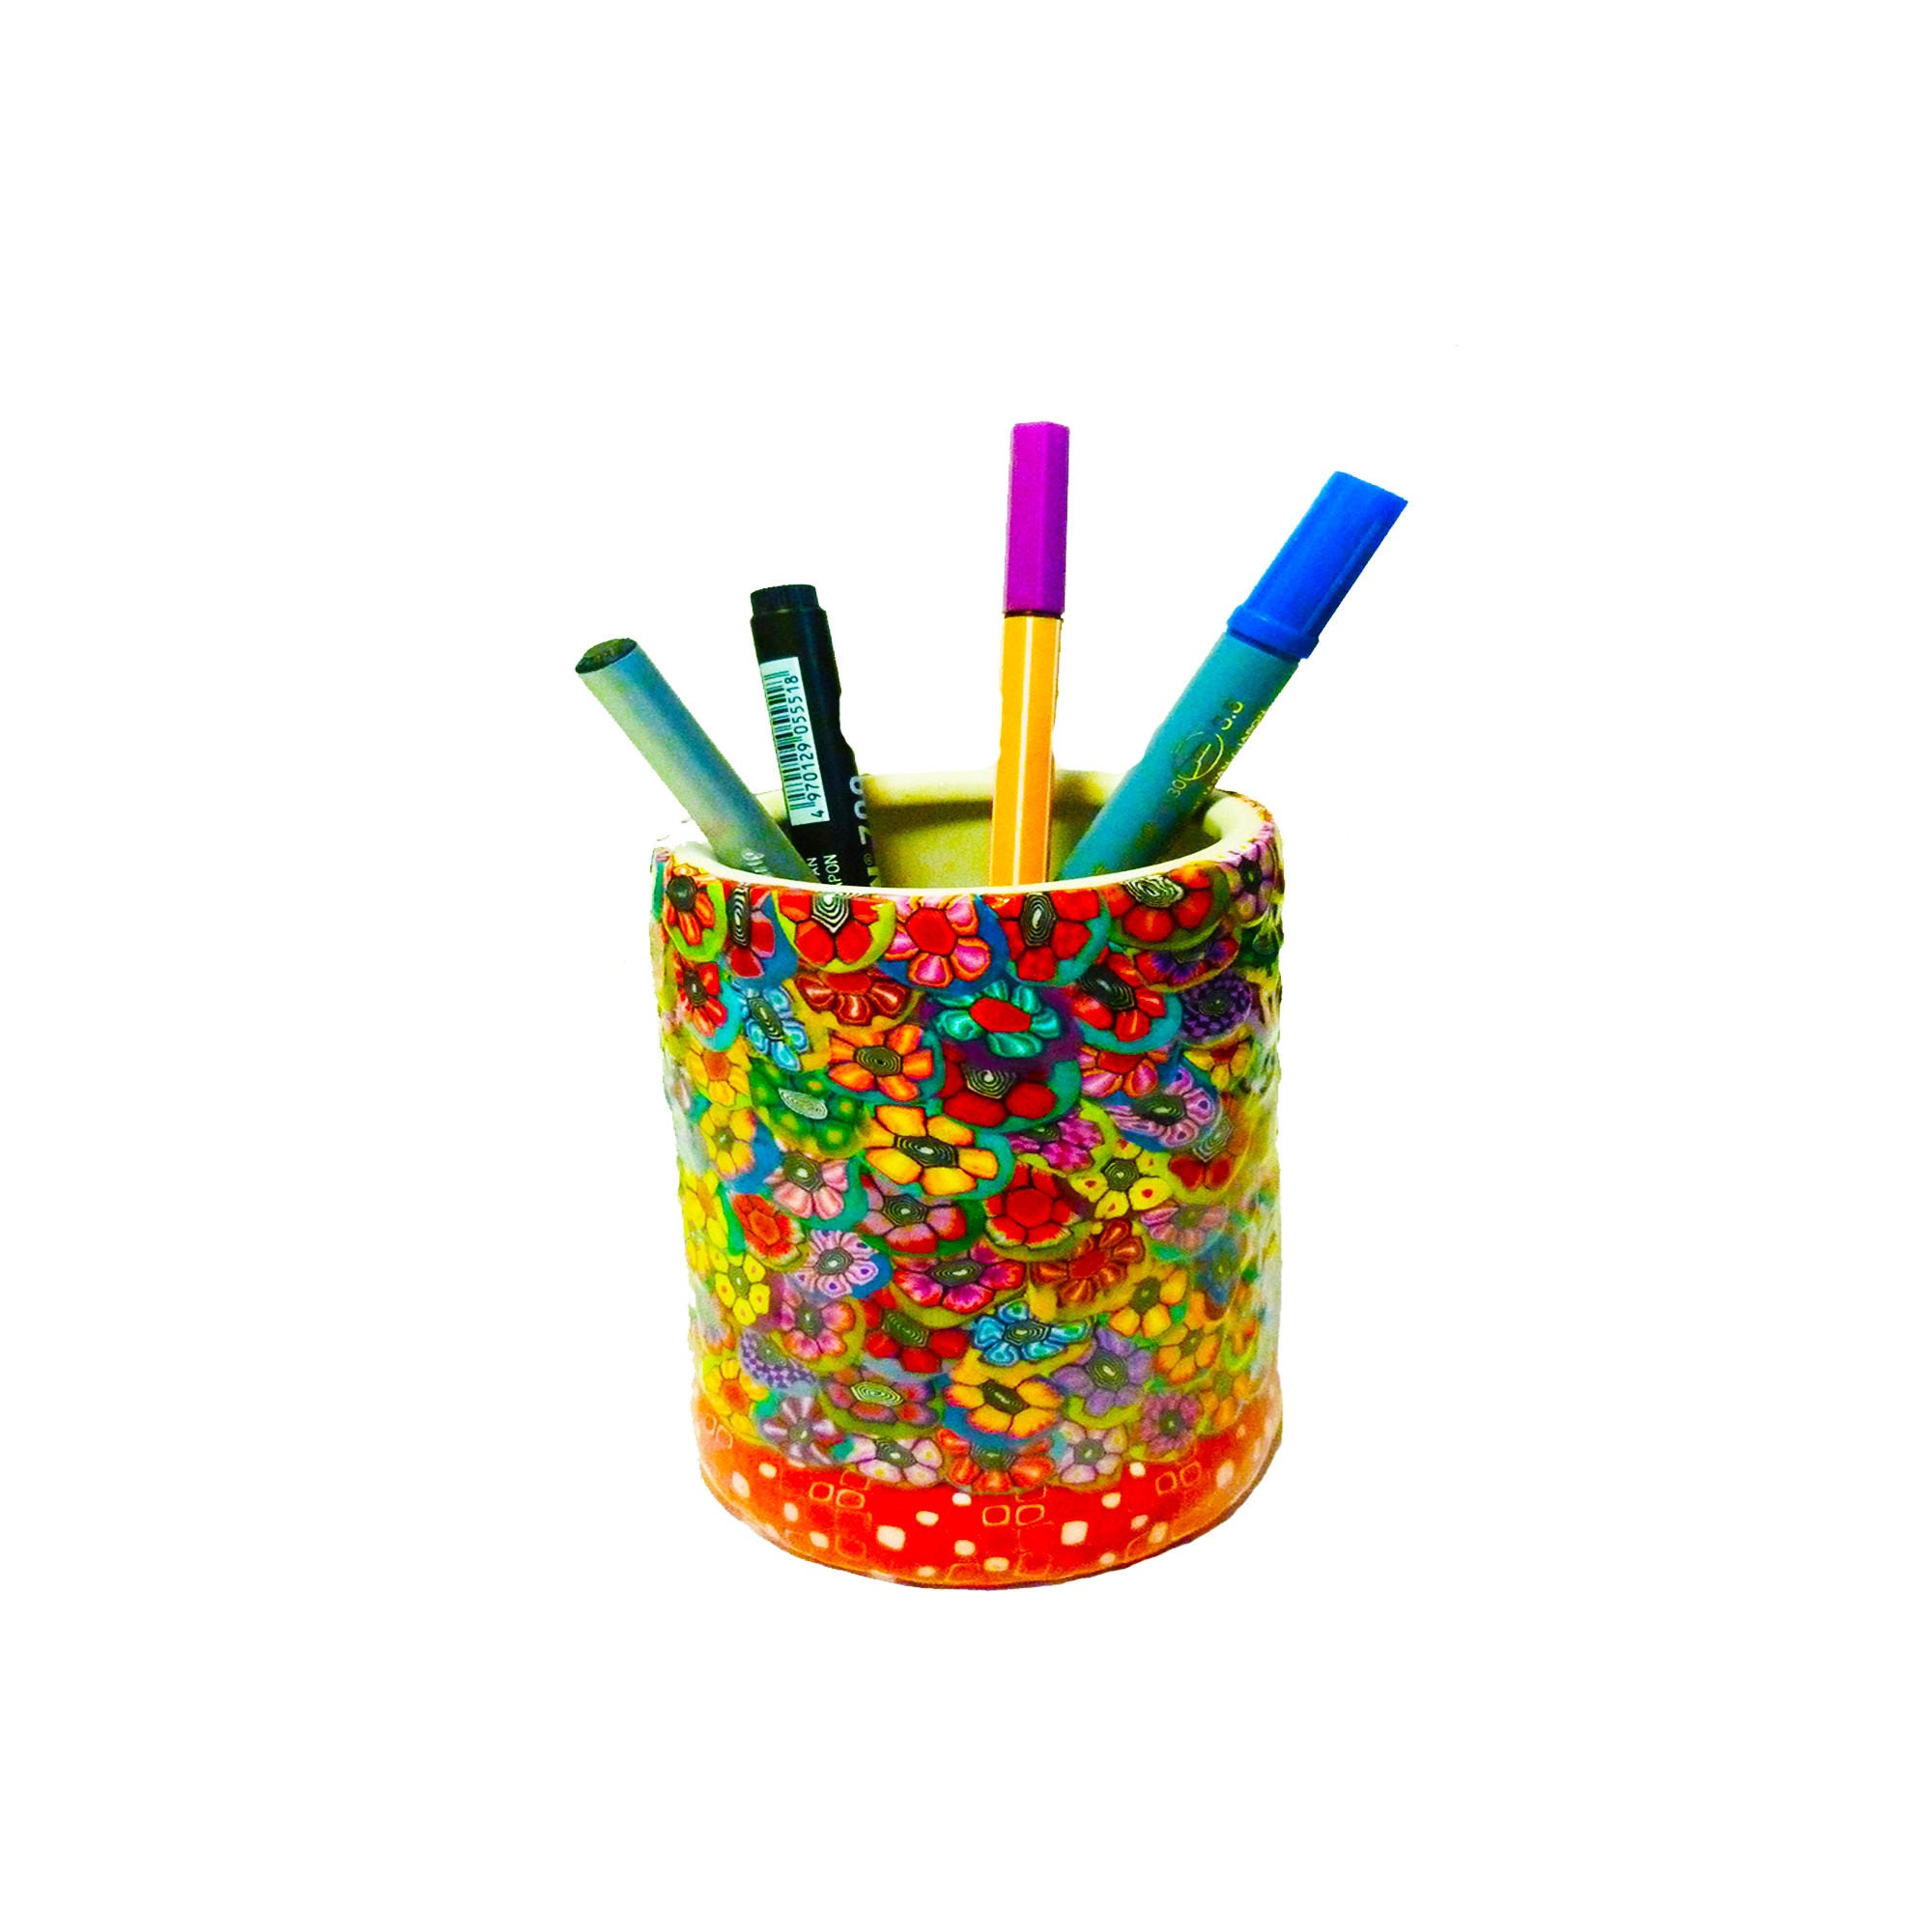 Funny Adult Pen Cup Pencil Holder – Rolling Rack Boutique